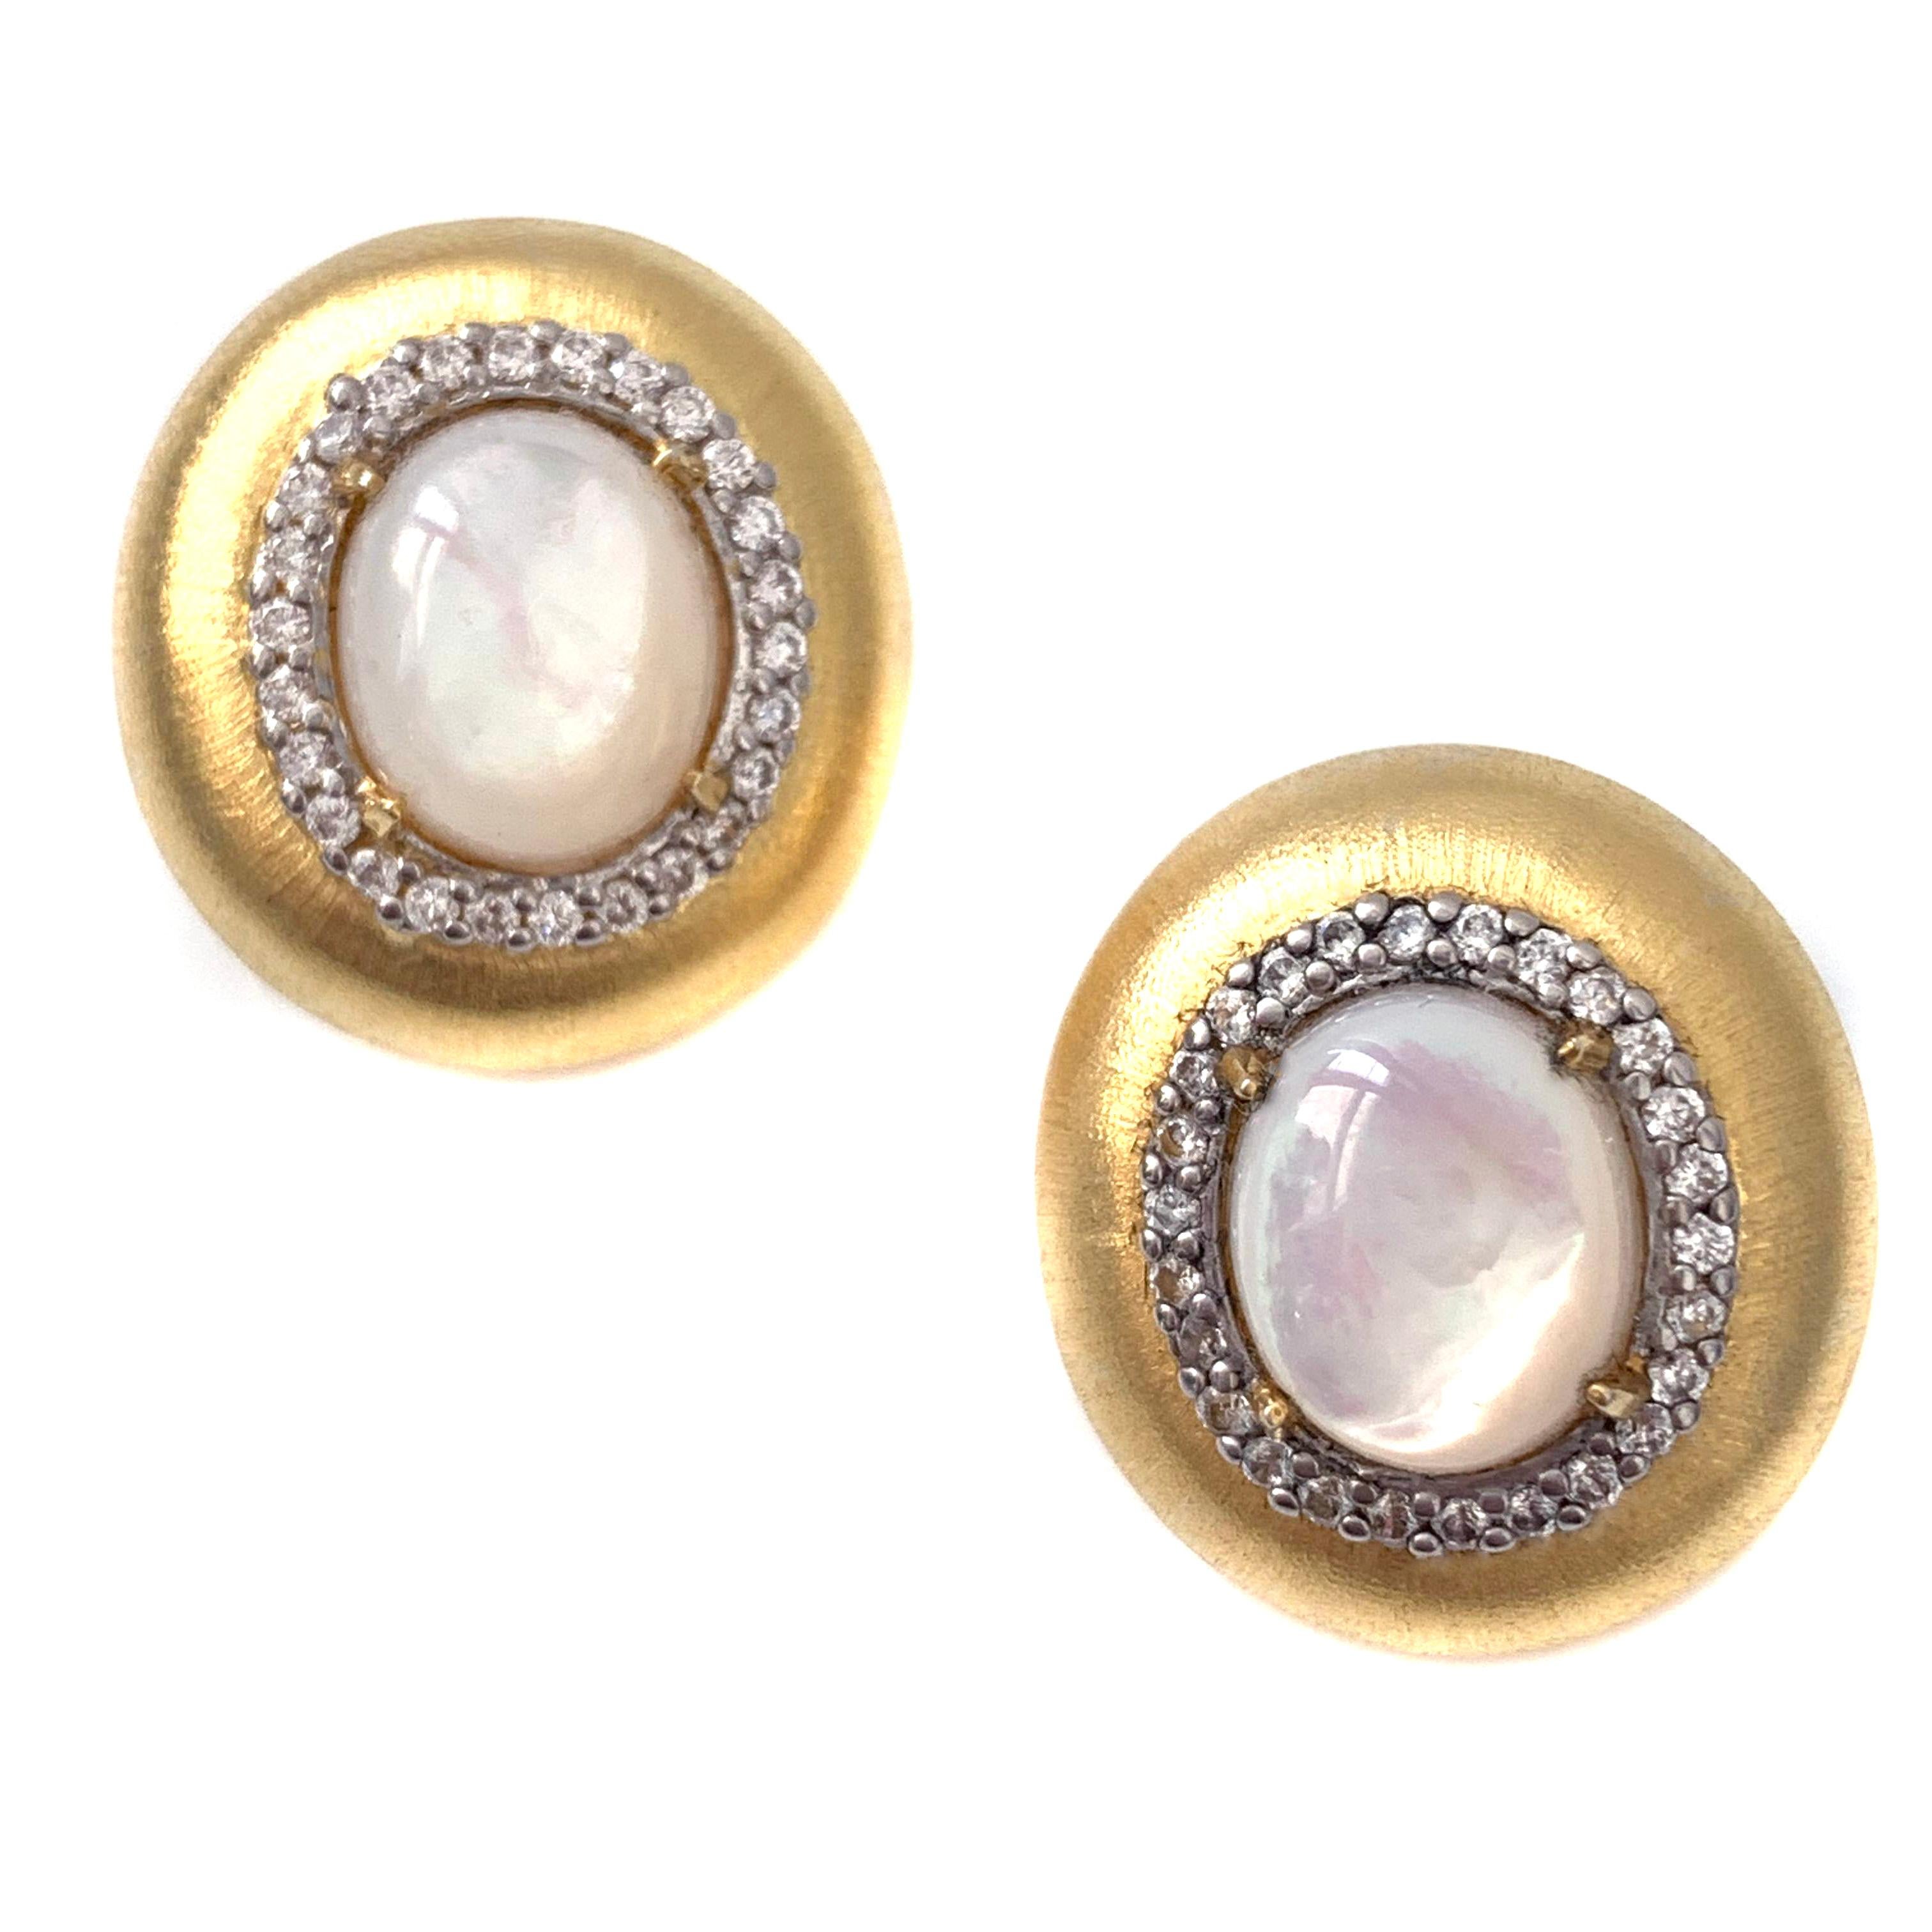 Bijoux Num Oval Mother of Pearl Vermeil Oval Button Clip-on Earrings

The earrings features lustrous oval cabochon cut mother of pearl and round simulated diamond cz, handset in 18k gold vermeil sterling silver, and handcrafted Italian Rigato ething